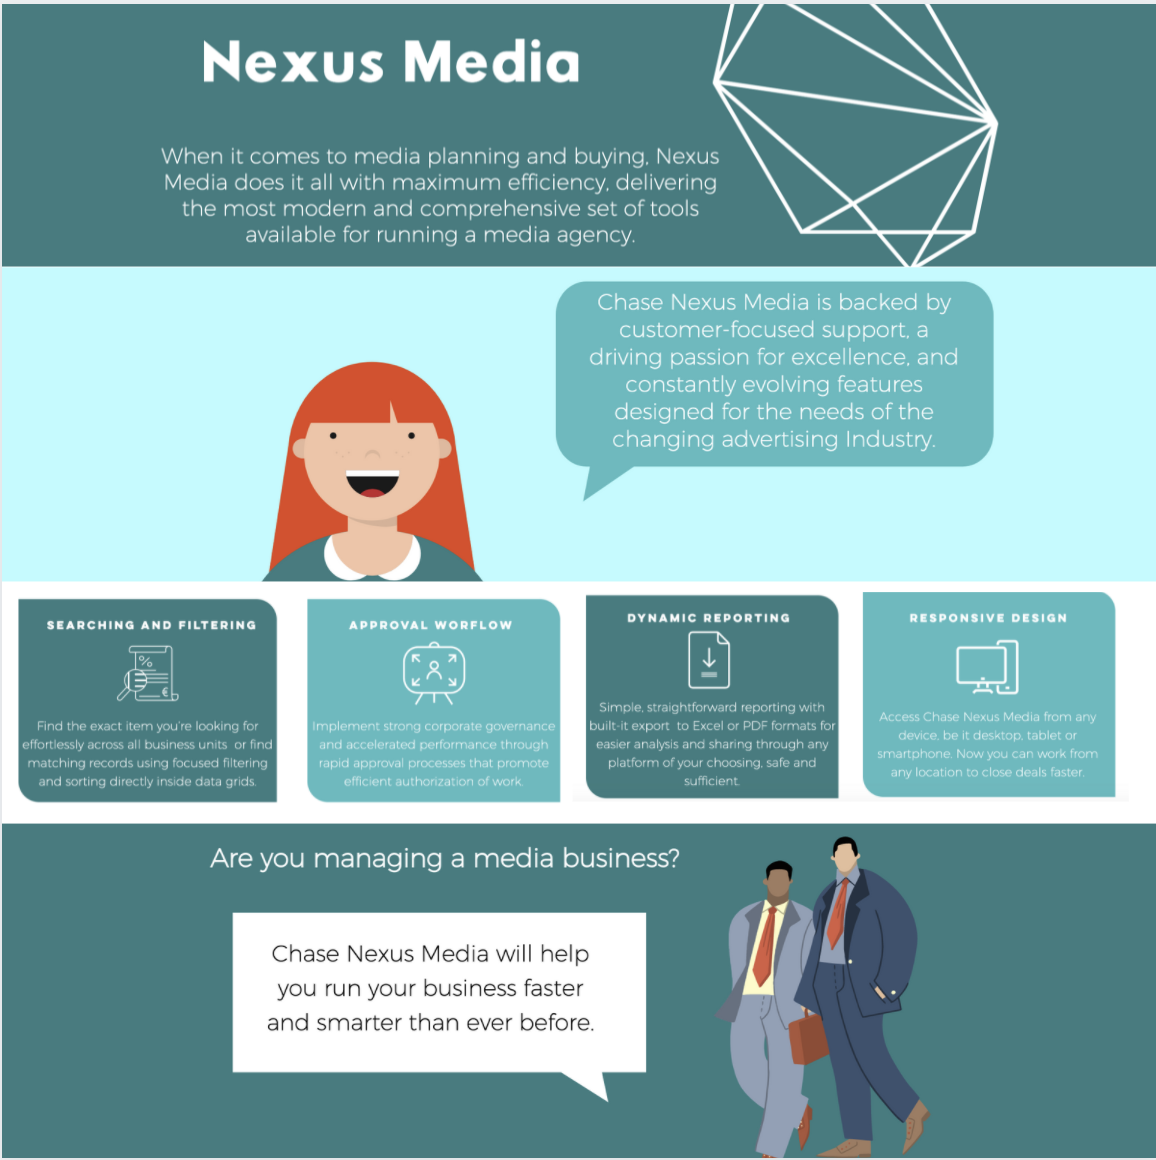 Chase Software Software - Chase Nexus Media - When it comes to media planning and buying, Nexus Media does it all with maximum efficiency, delivering the most modern and comprehensive set of tools available for running a media agency.